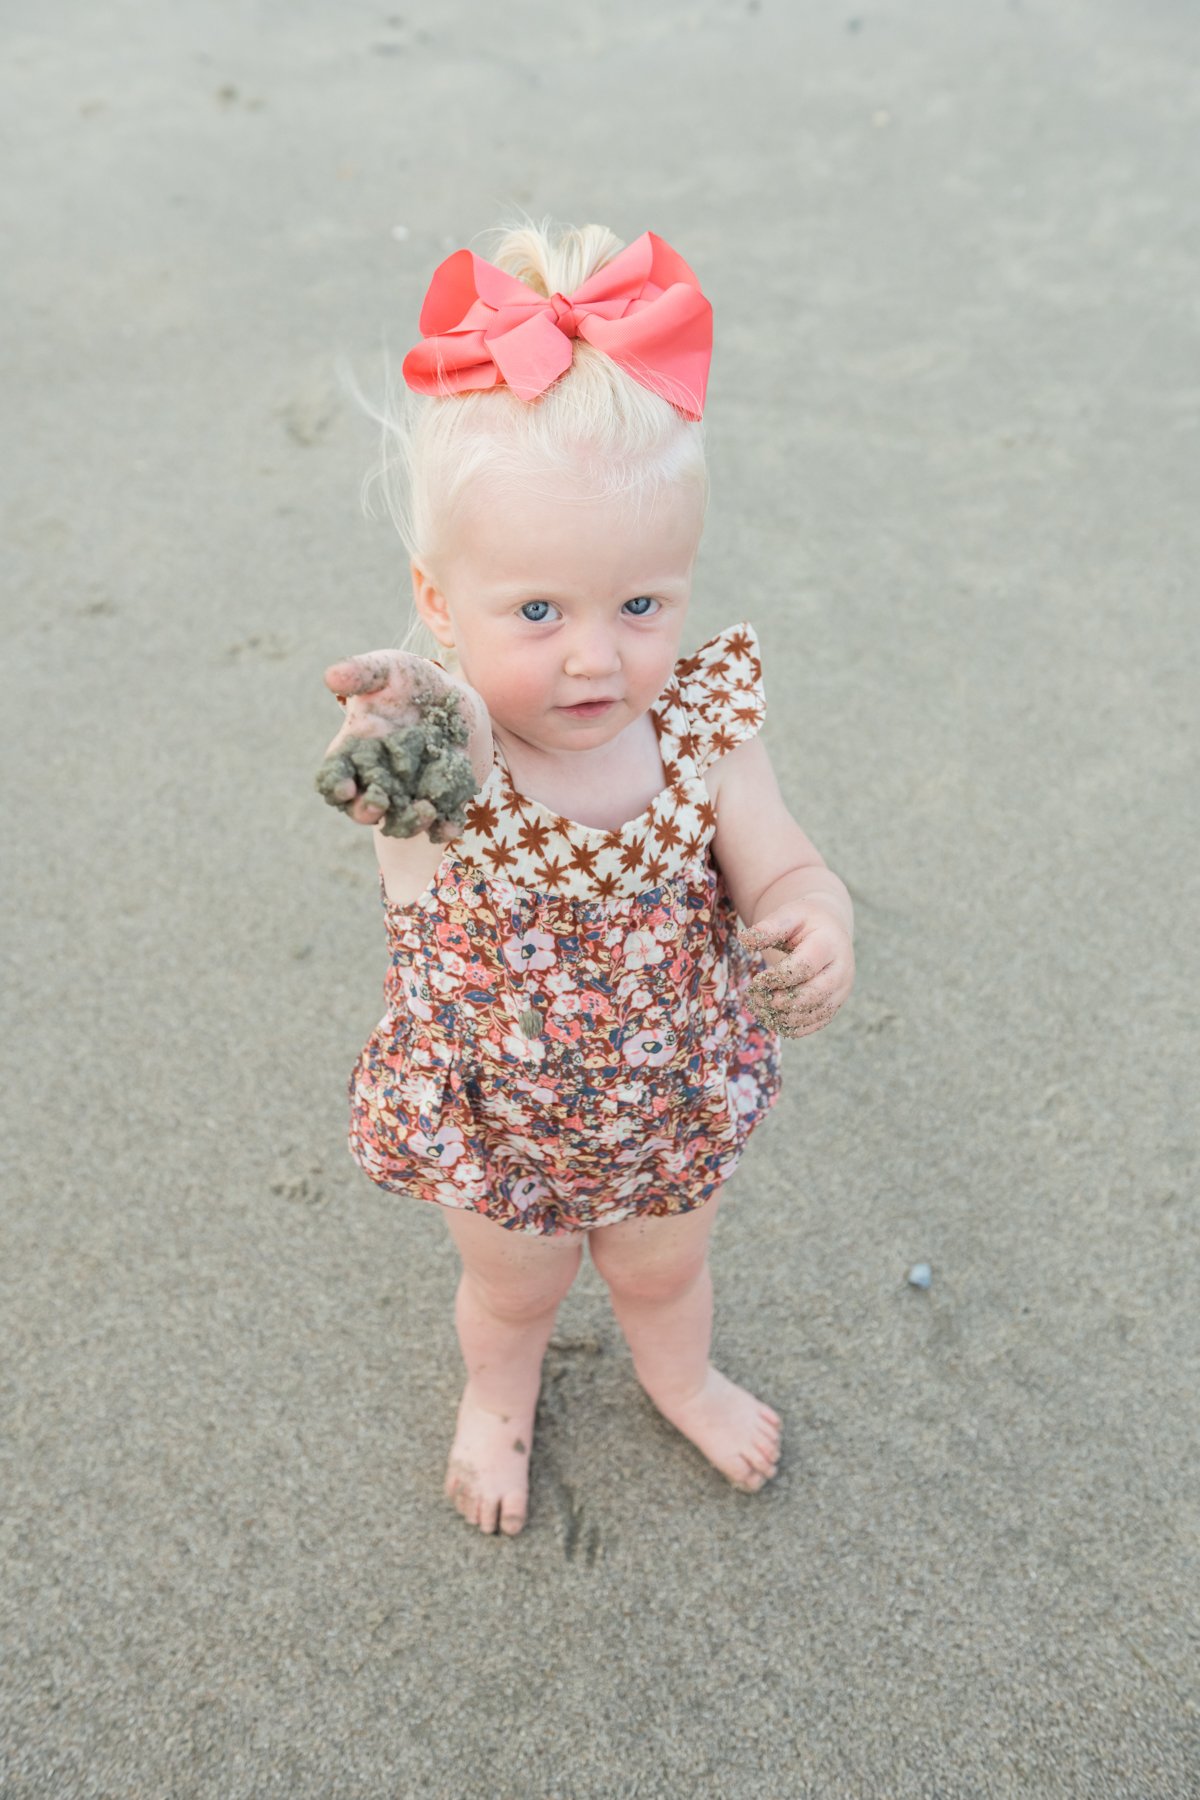  Isle of Palms Family Portrait Photography by Reese Moore Photography 